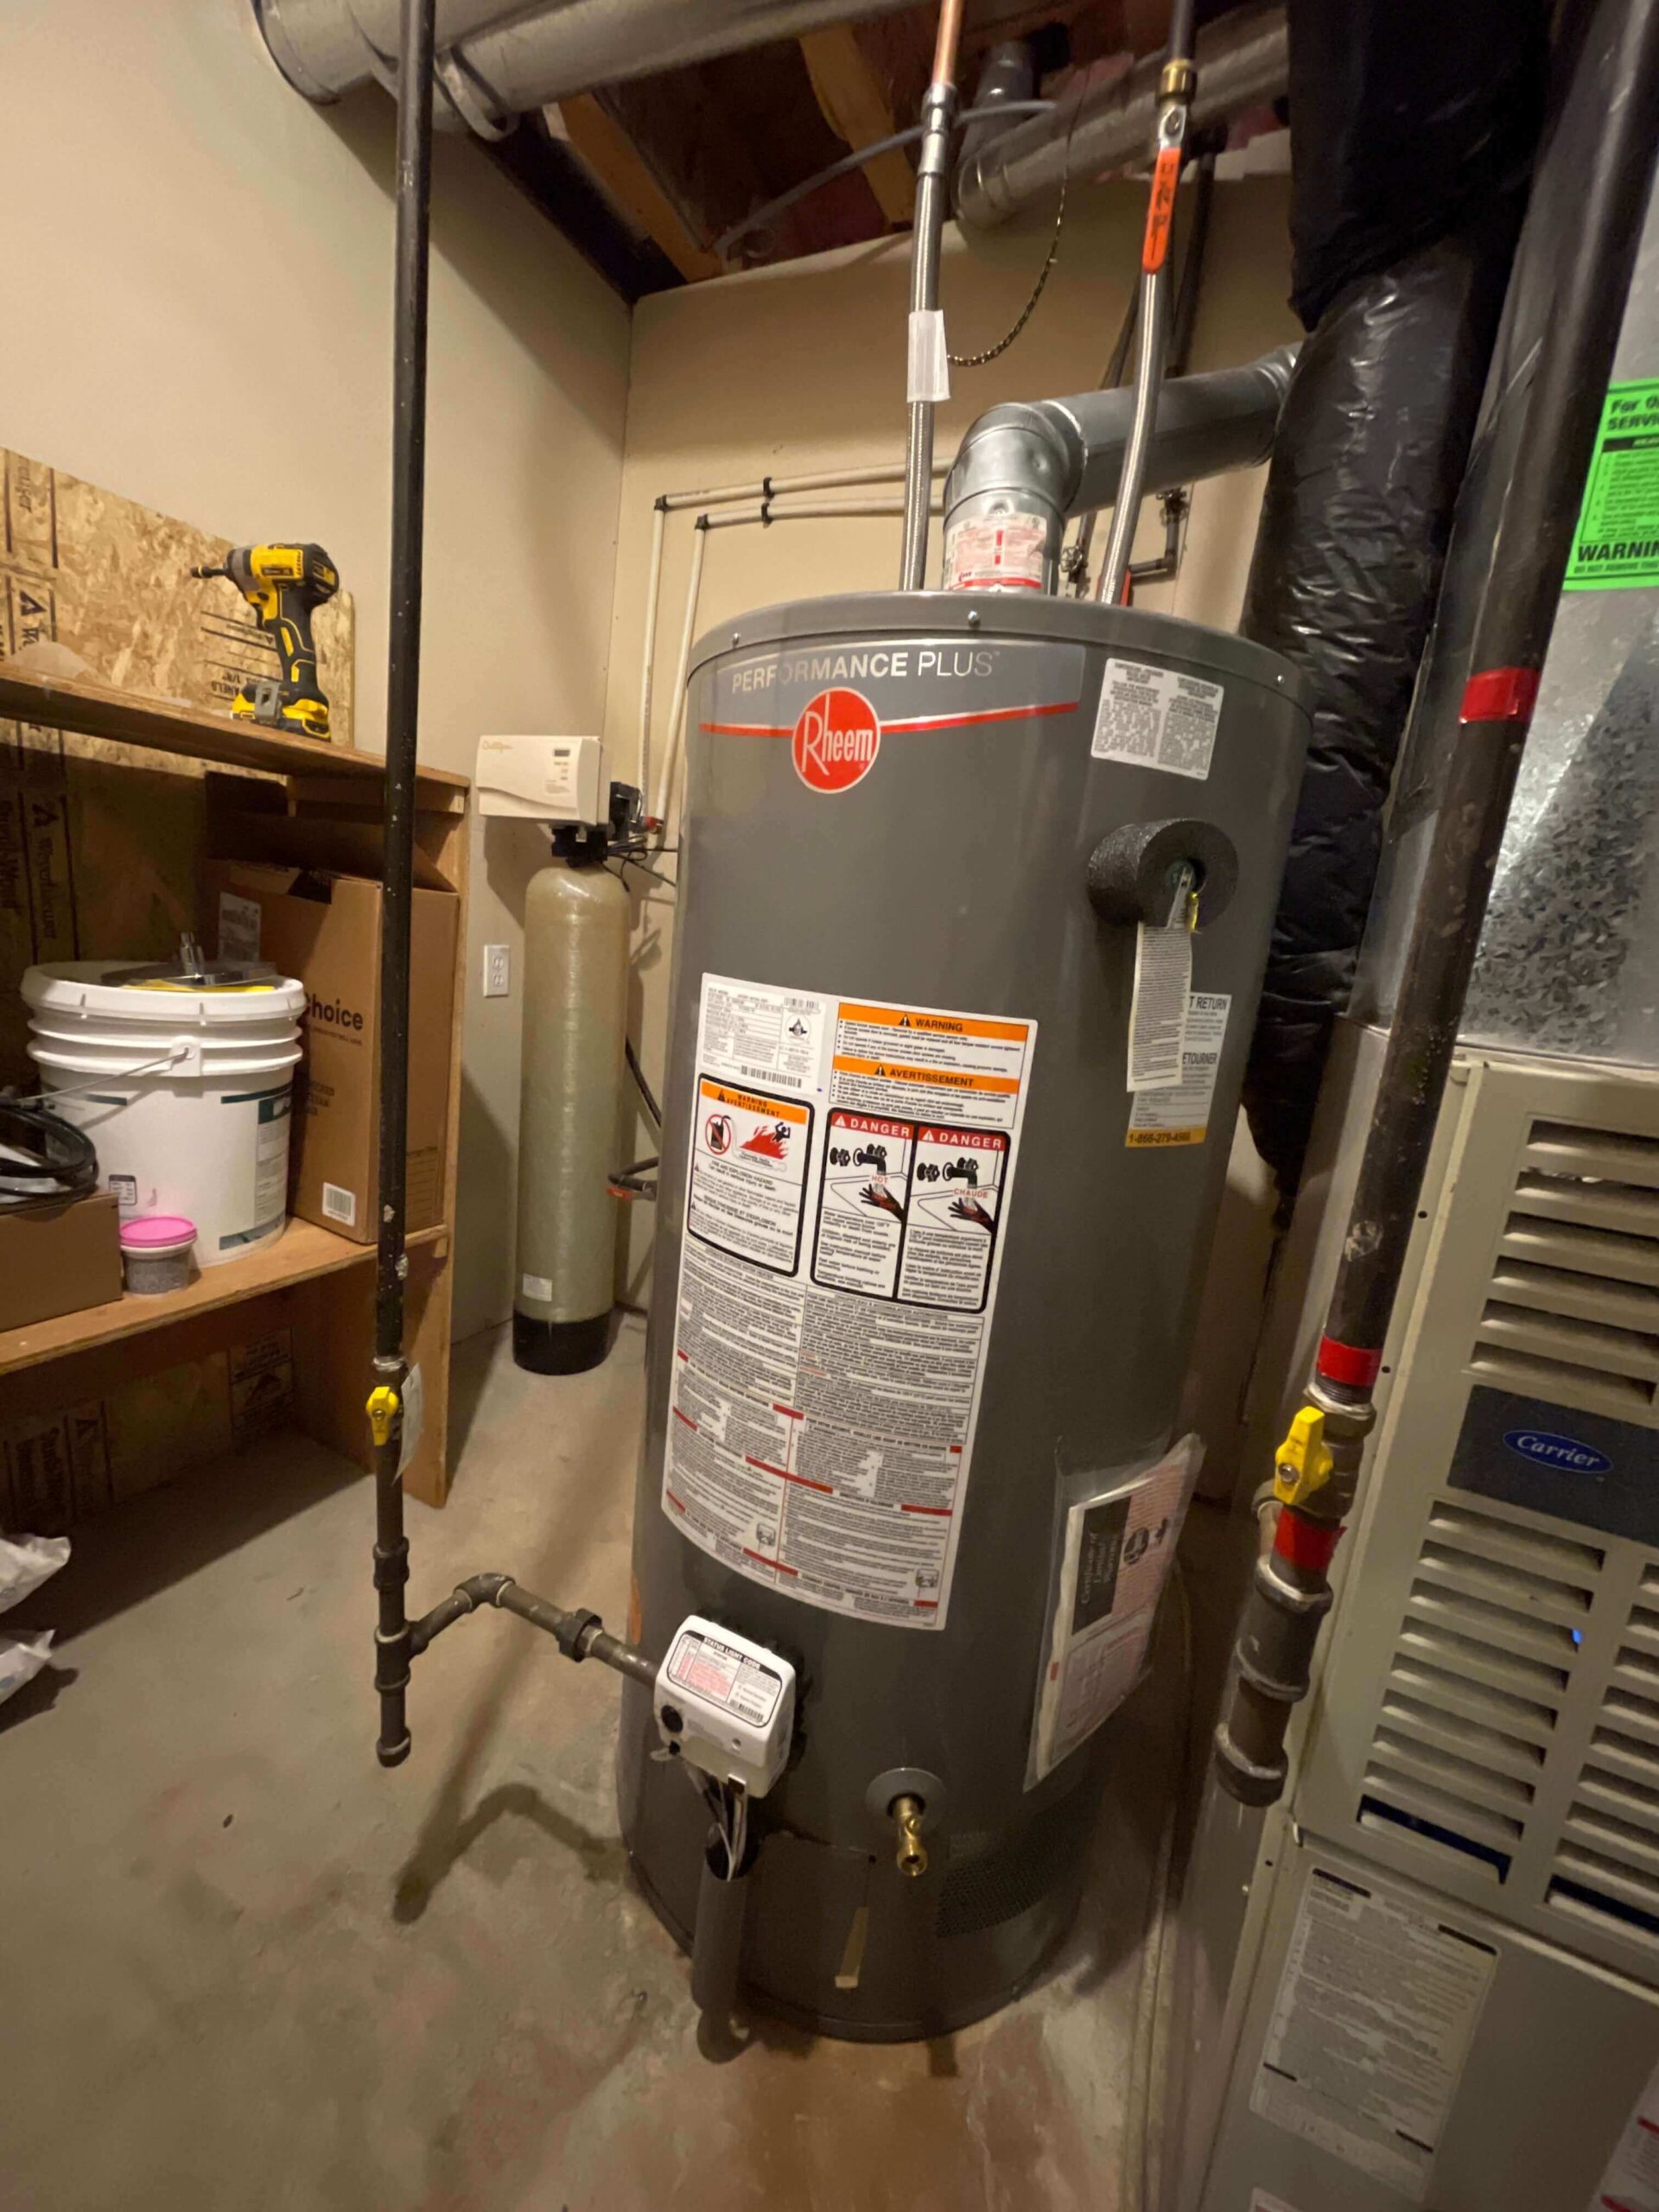 upgrading to new rheem tanked water heater